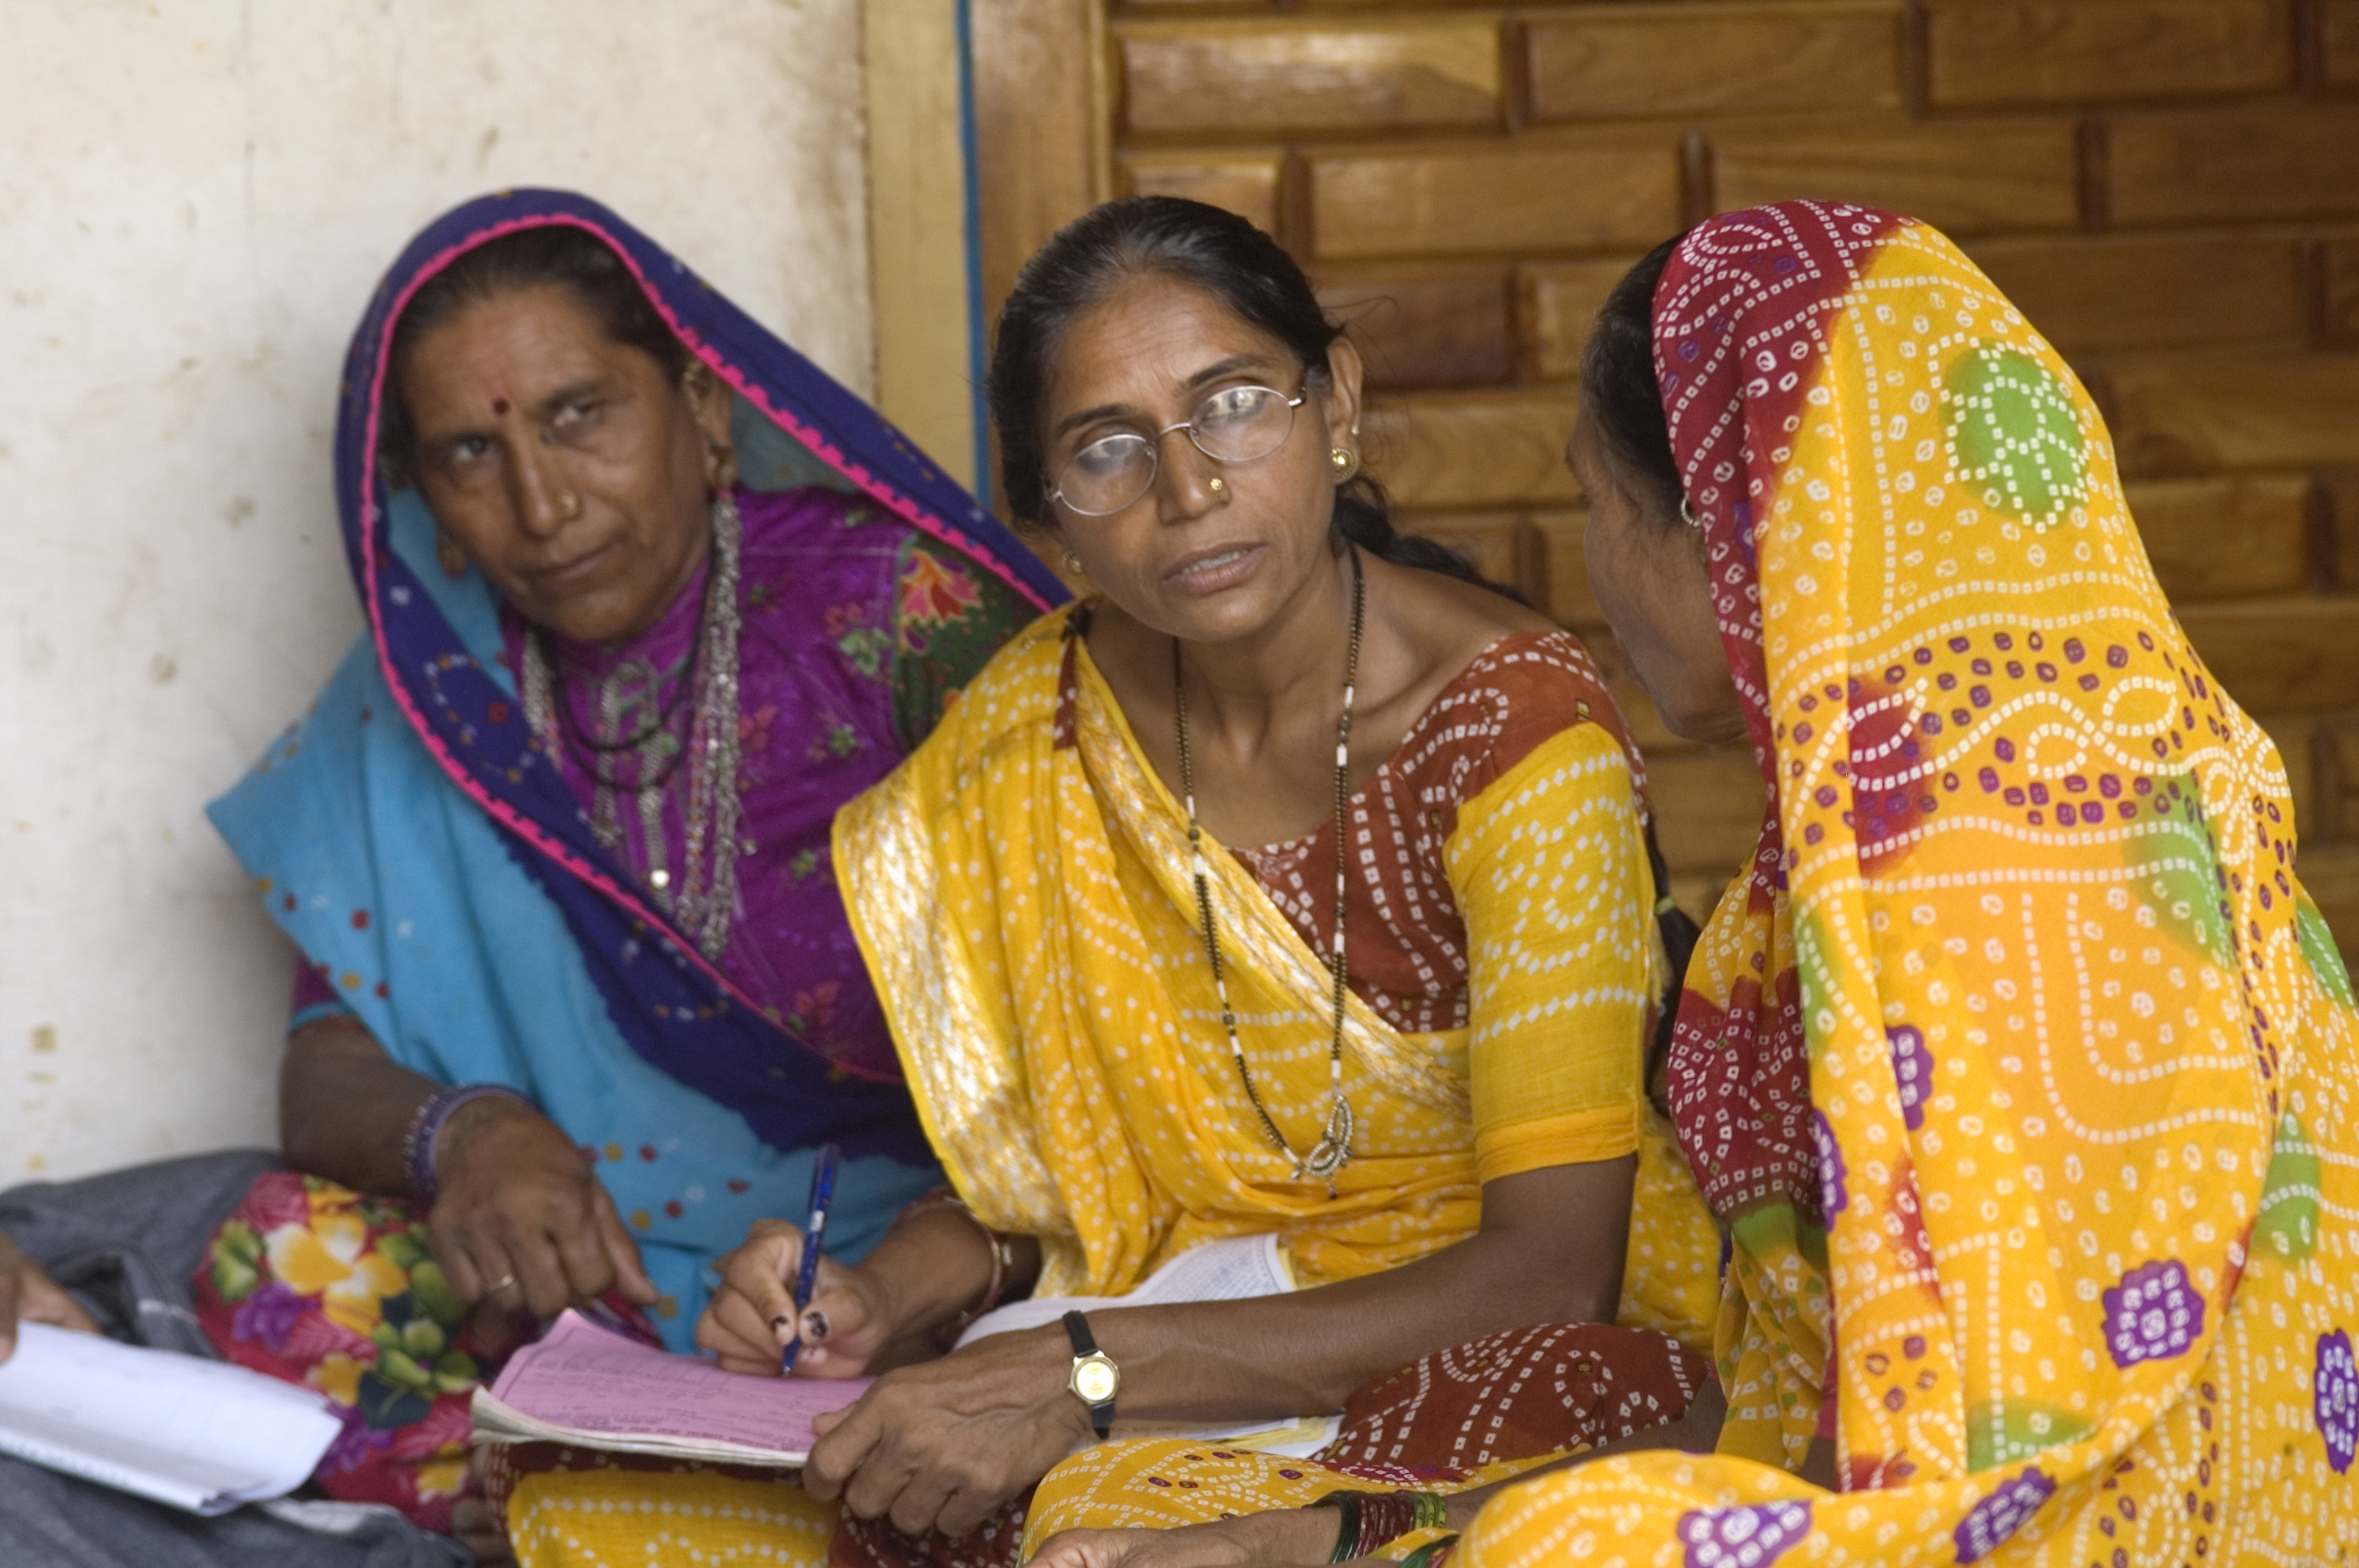 Three seated Indian women in saris talking to one another